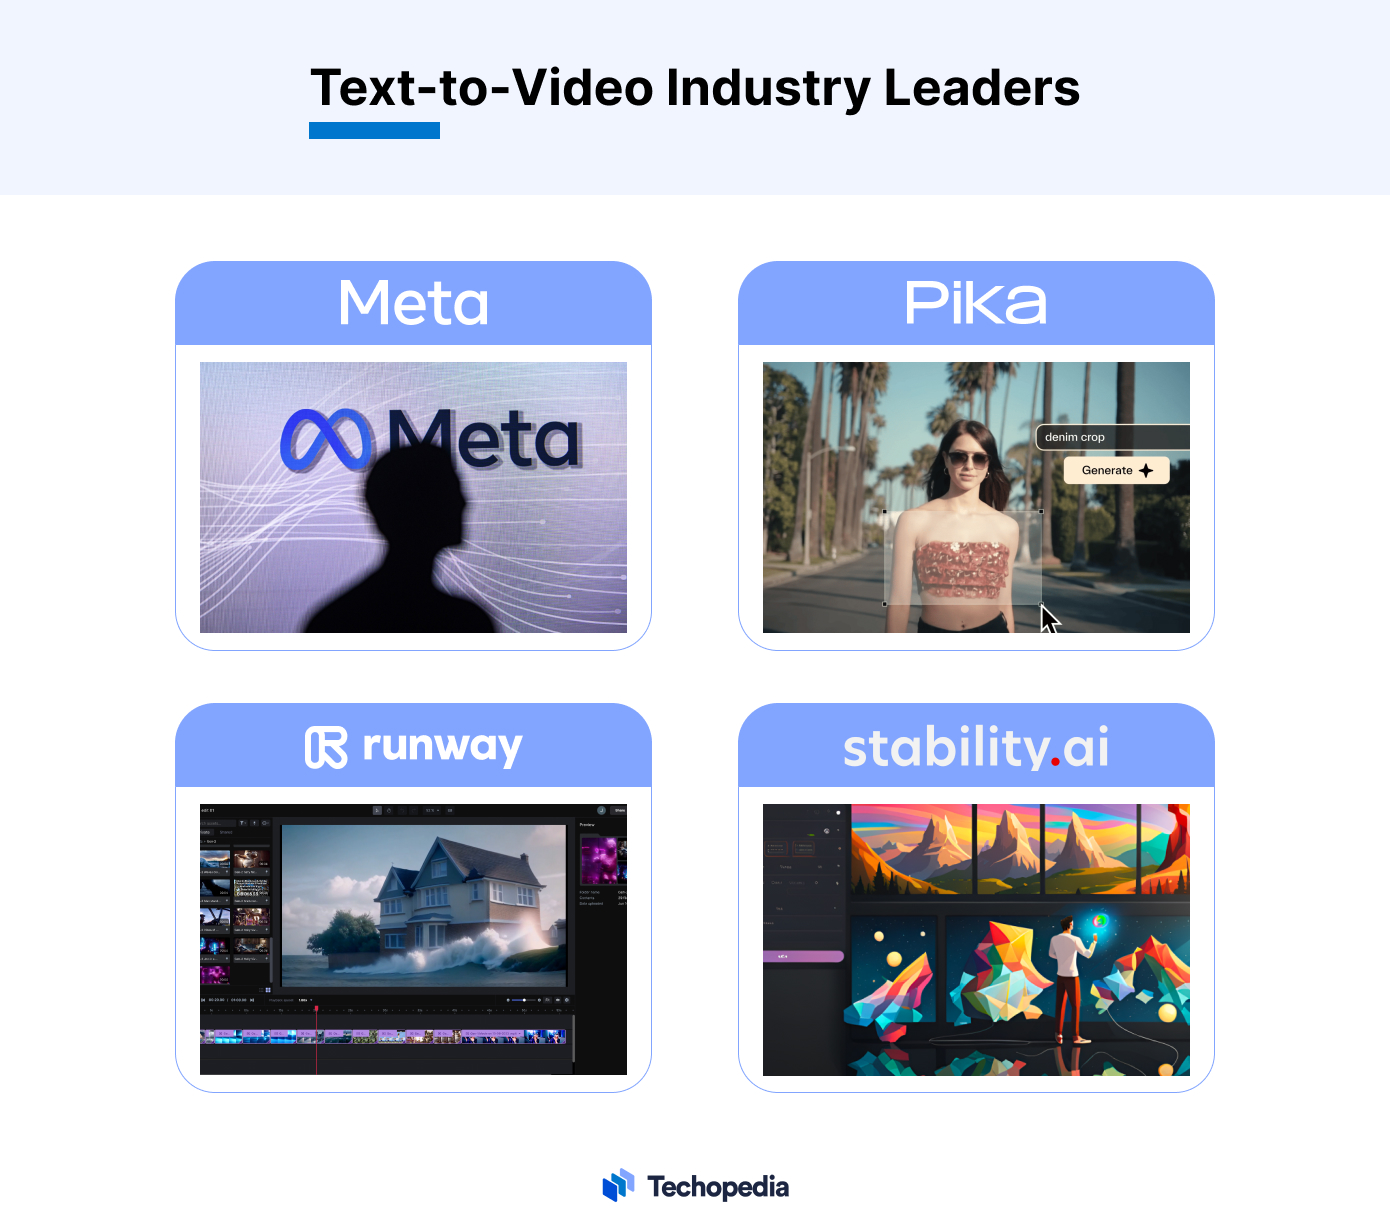 Text-to-Video industry leaders